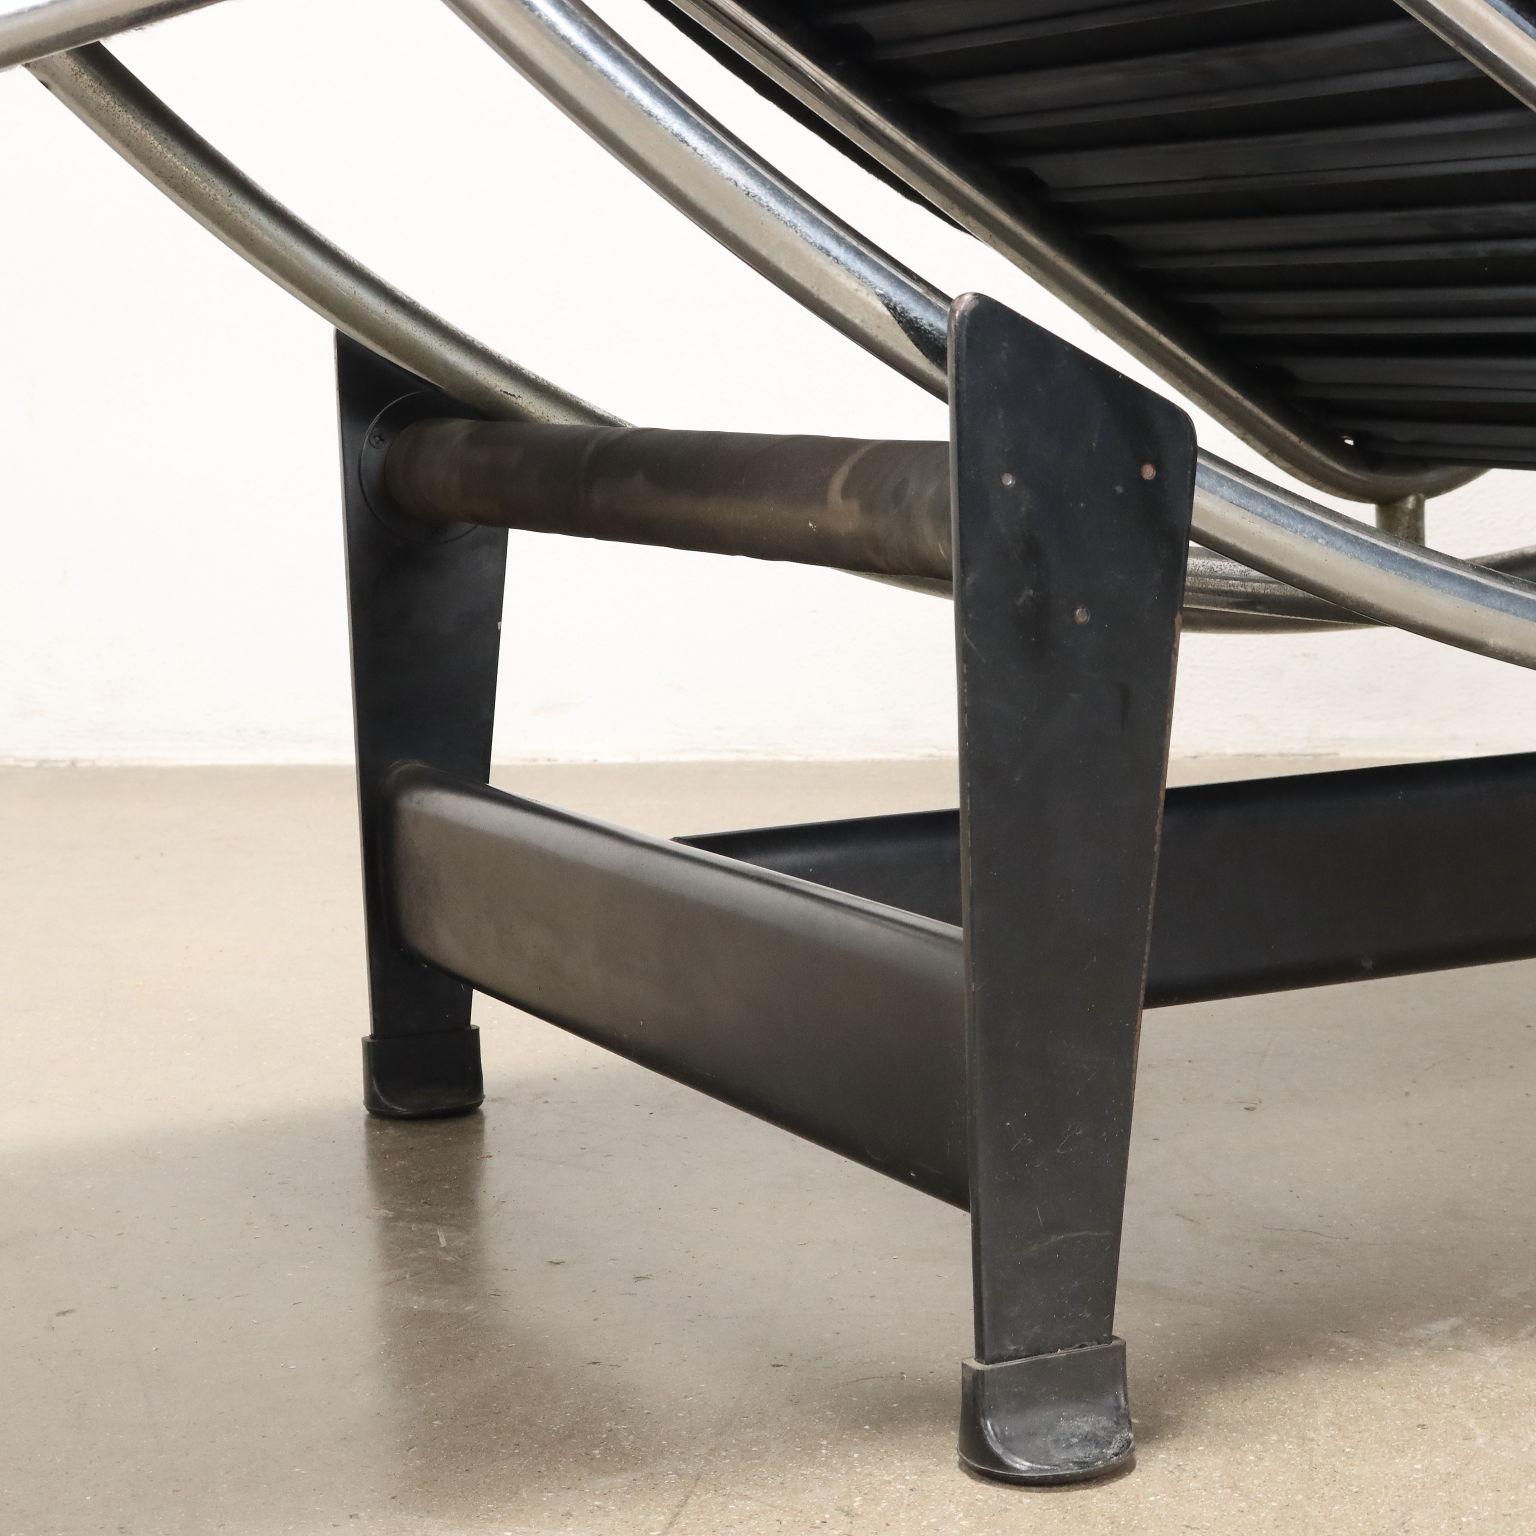 Chaise Longue Modell 'LC4' Le Corbusier für Cassina 1980er Jahre (Metall) im Angebot